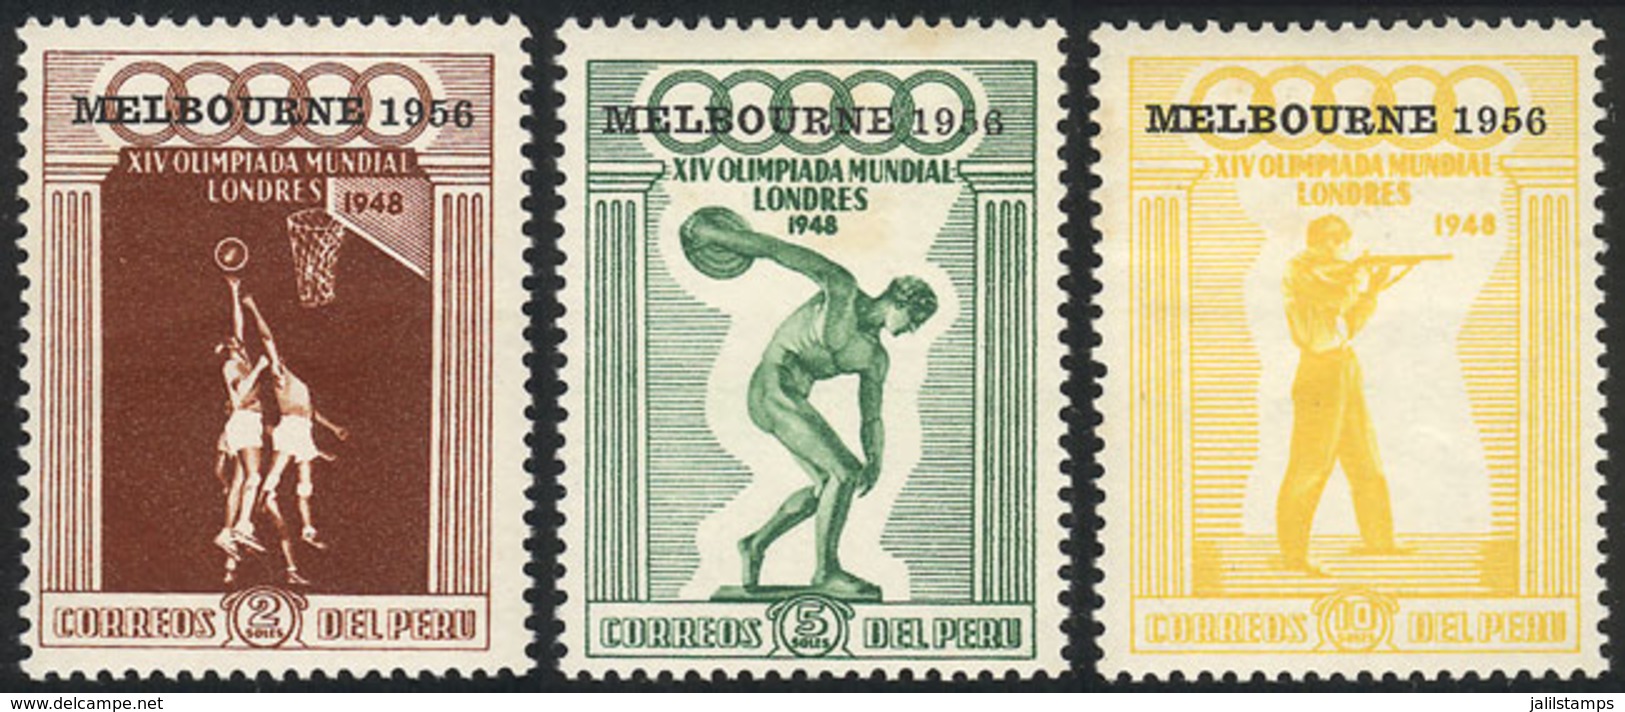 PERU: Yvert 117/119, 1956 Melbourne Olympic Games, The 3 Stamps With Red Overprint "AEREO" OMITTED, Very Rare, Mint But  - Peru